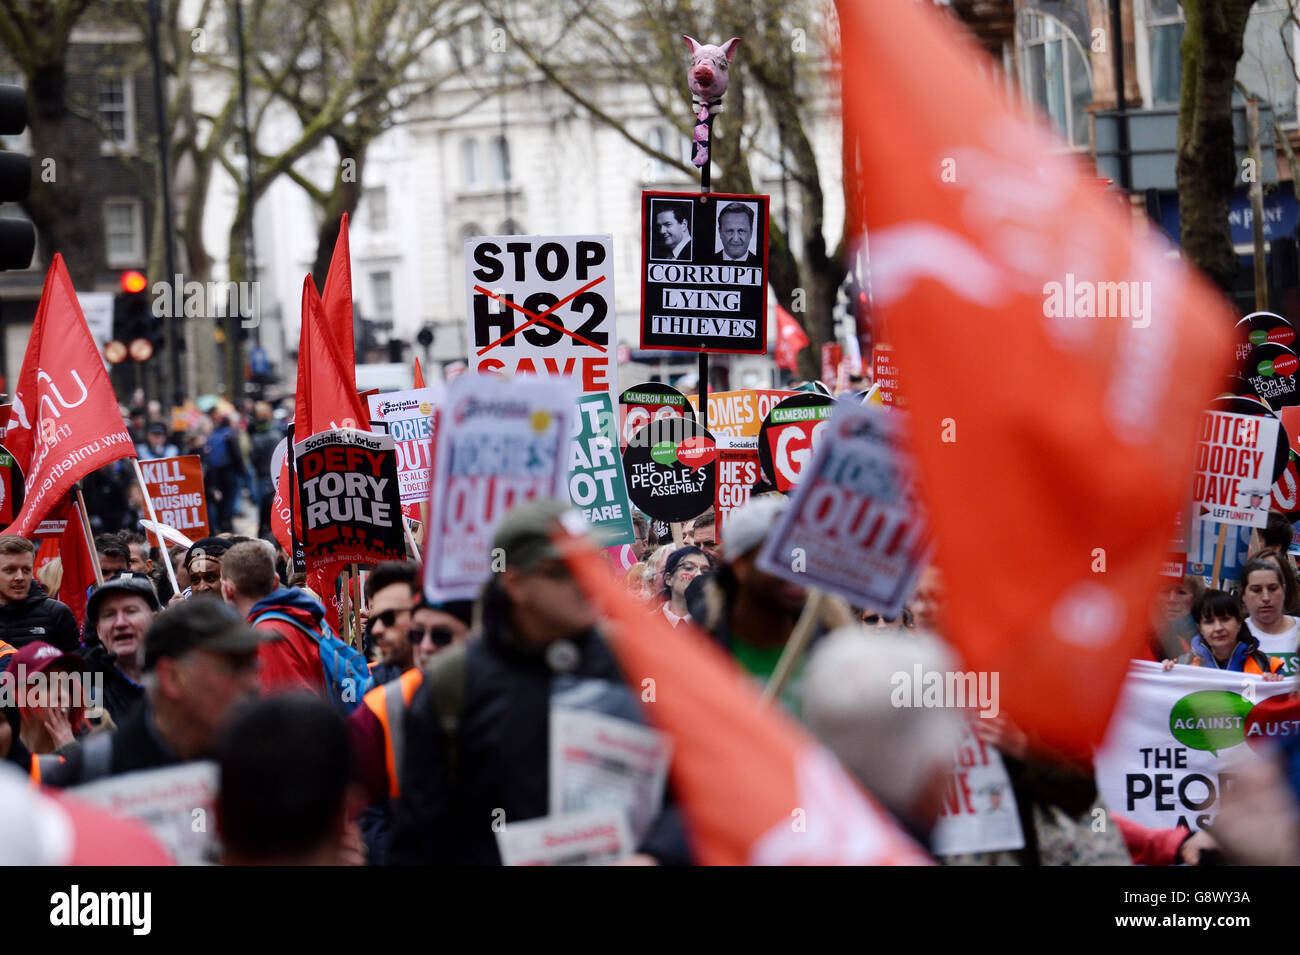 Campaigners marching in an anti-austerity demonstration in central London. Stock Photo